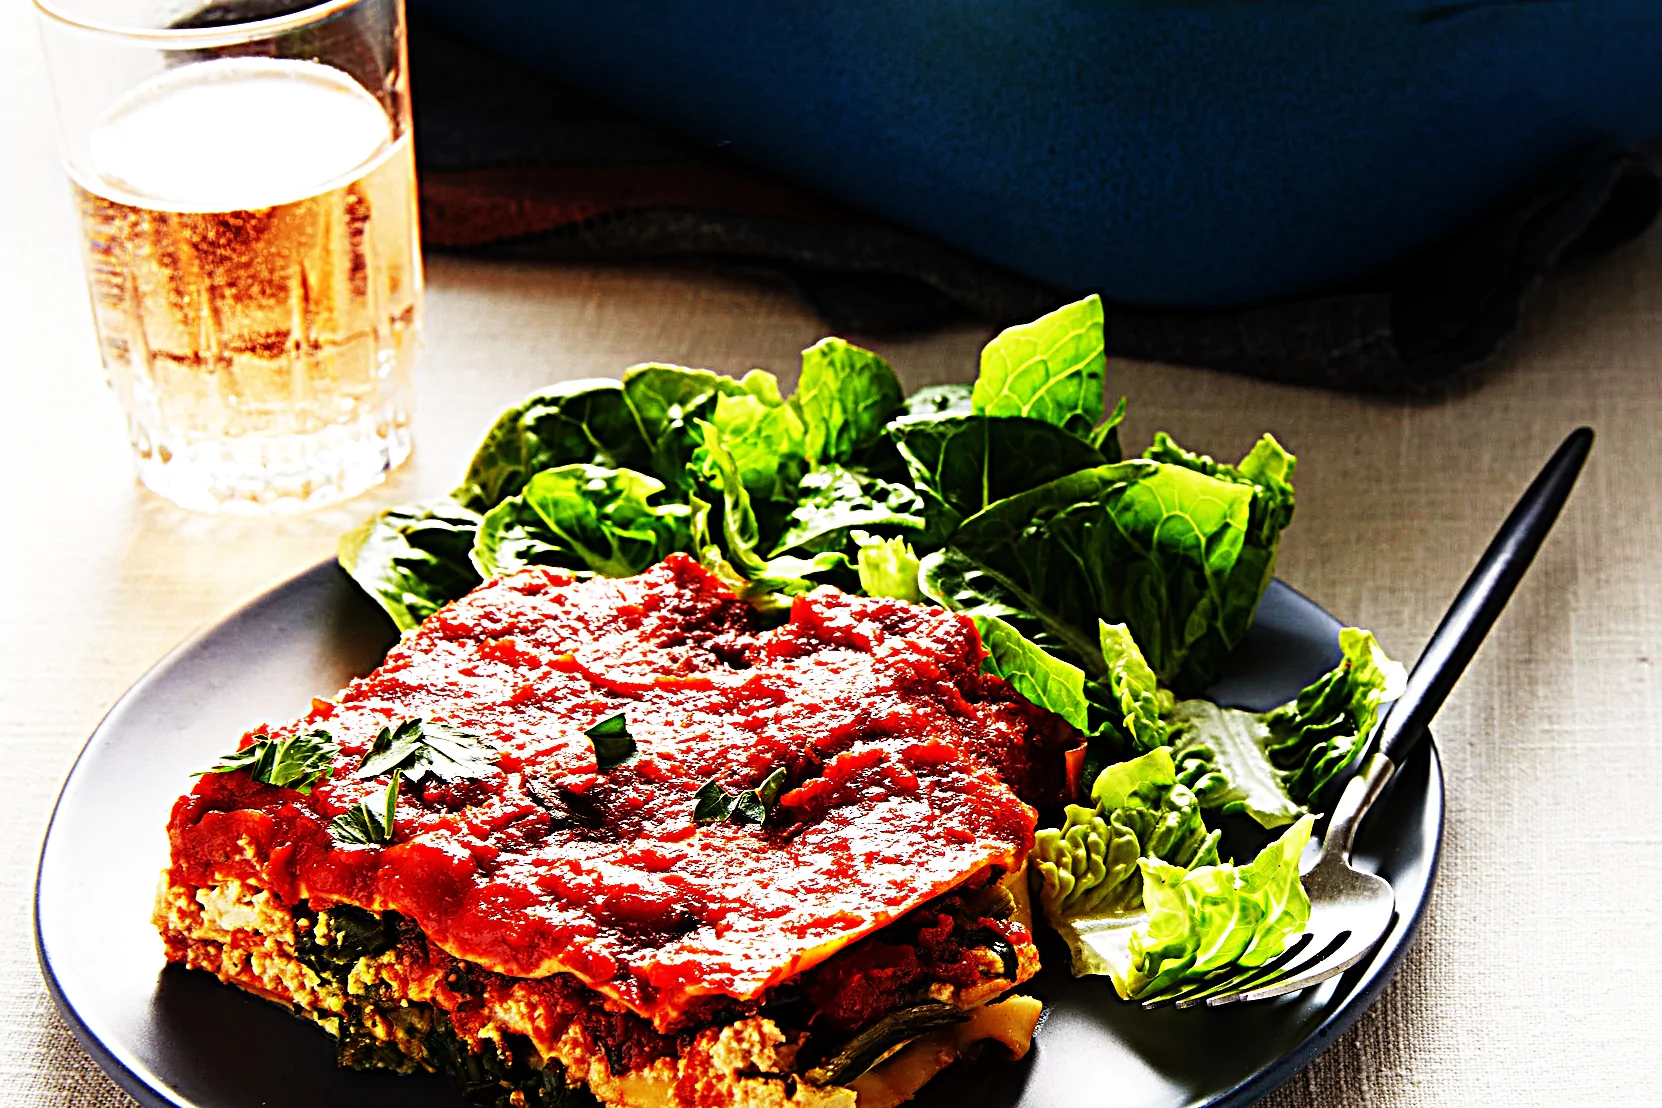 Stupid-Easy Recipe for Vegan Spinach Lasagna (#1 Top-Rated)